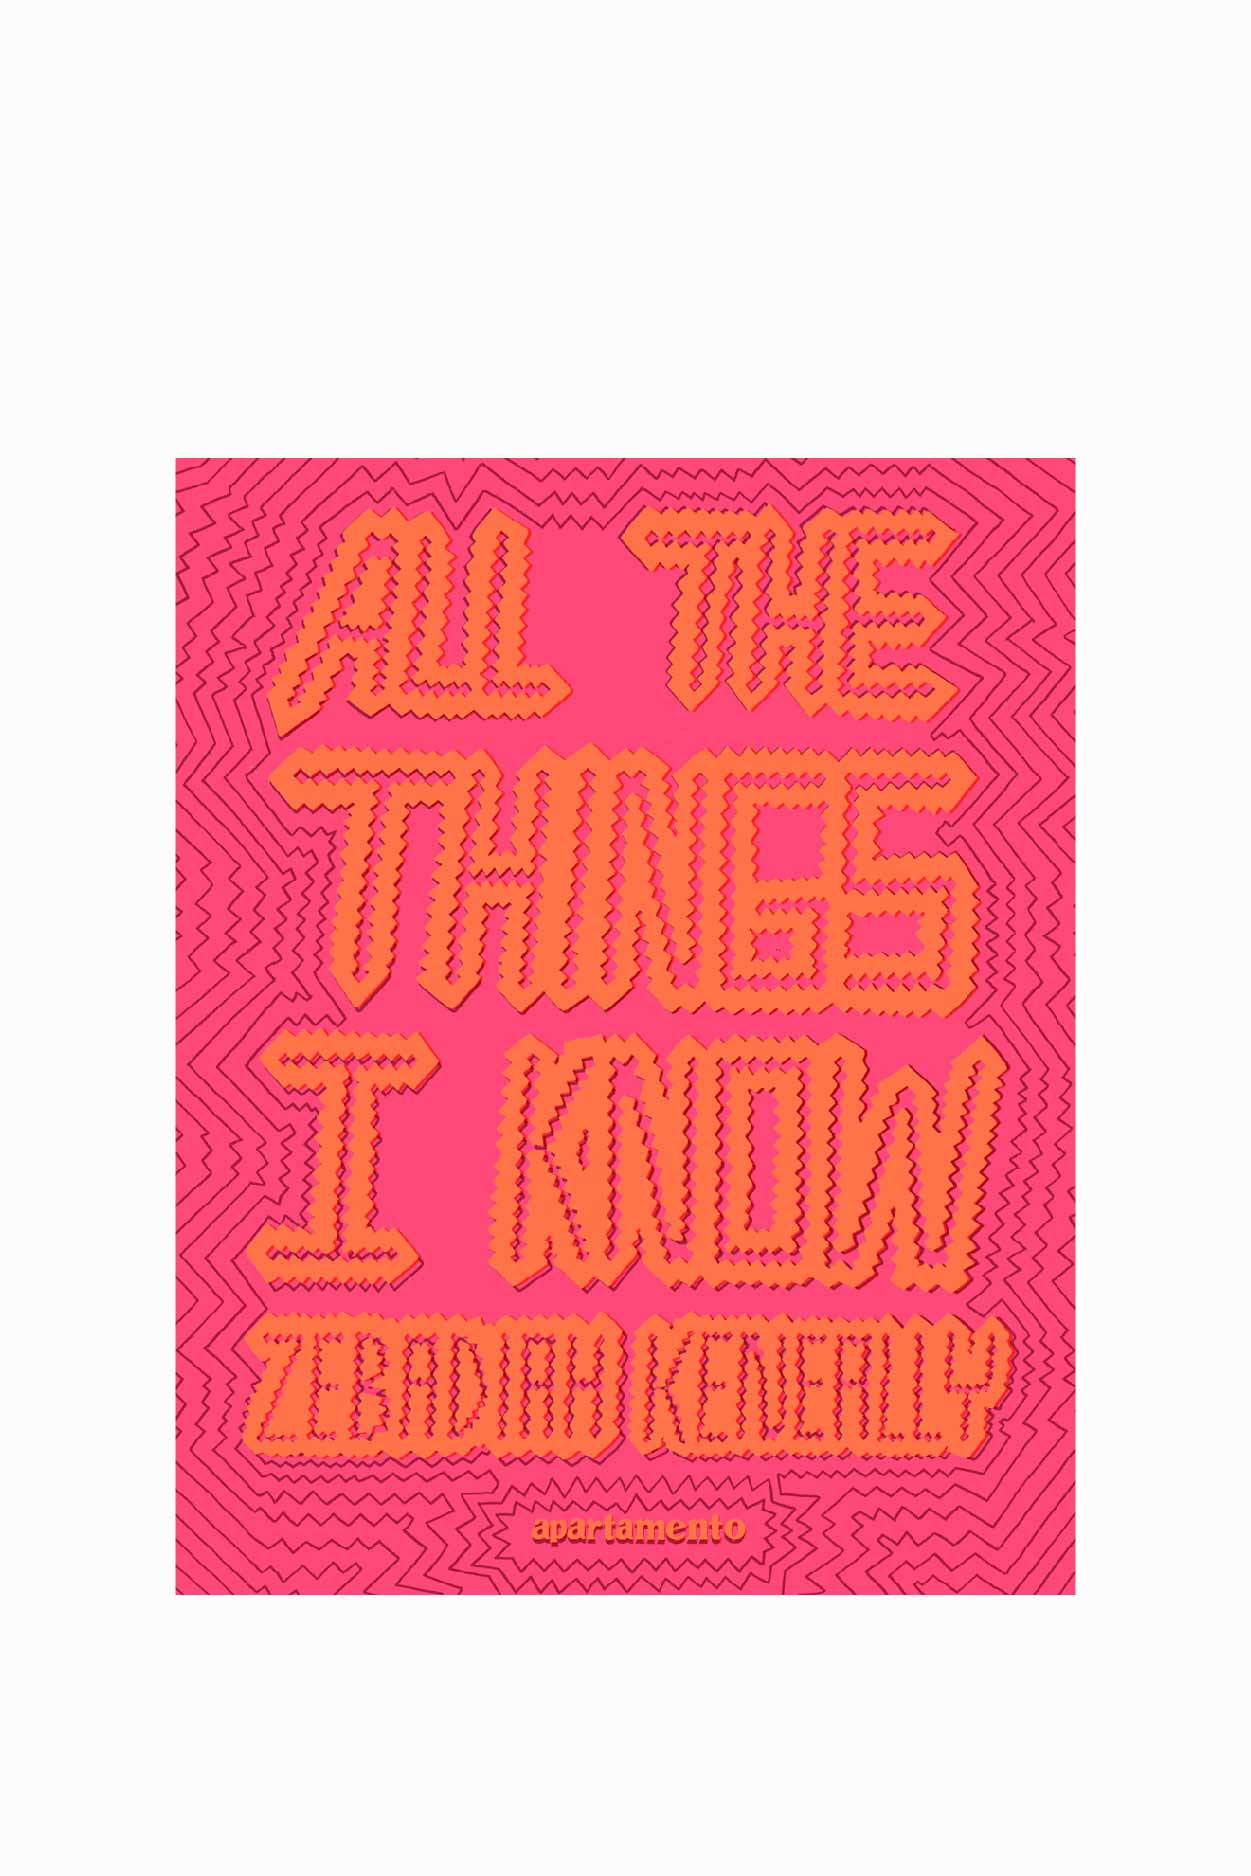 All The Things I know - Zebadiah Keneally